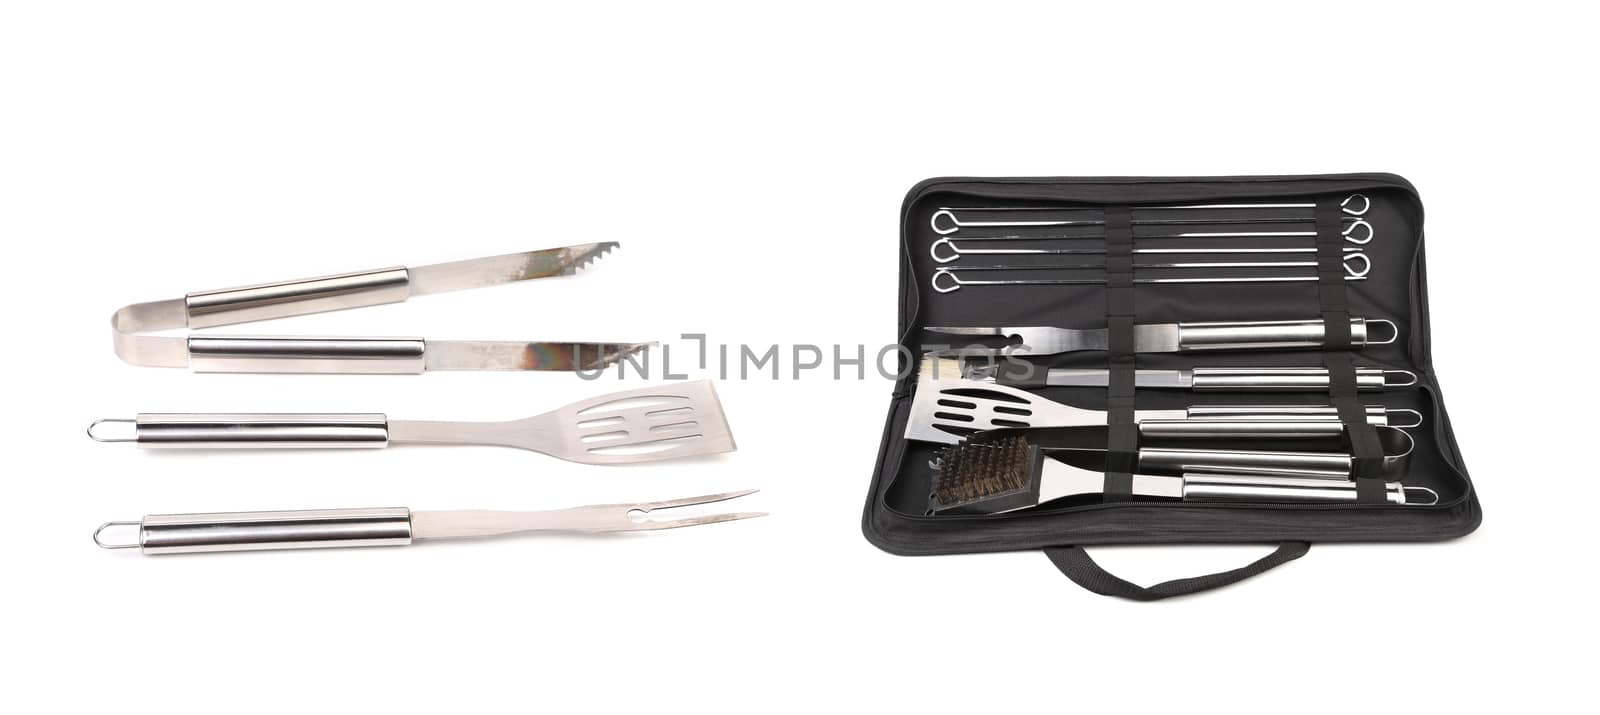 Set of tools for bbq in black bag. by indigolotos